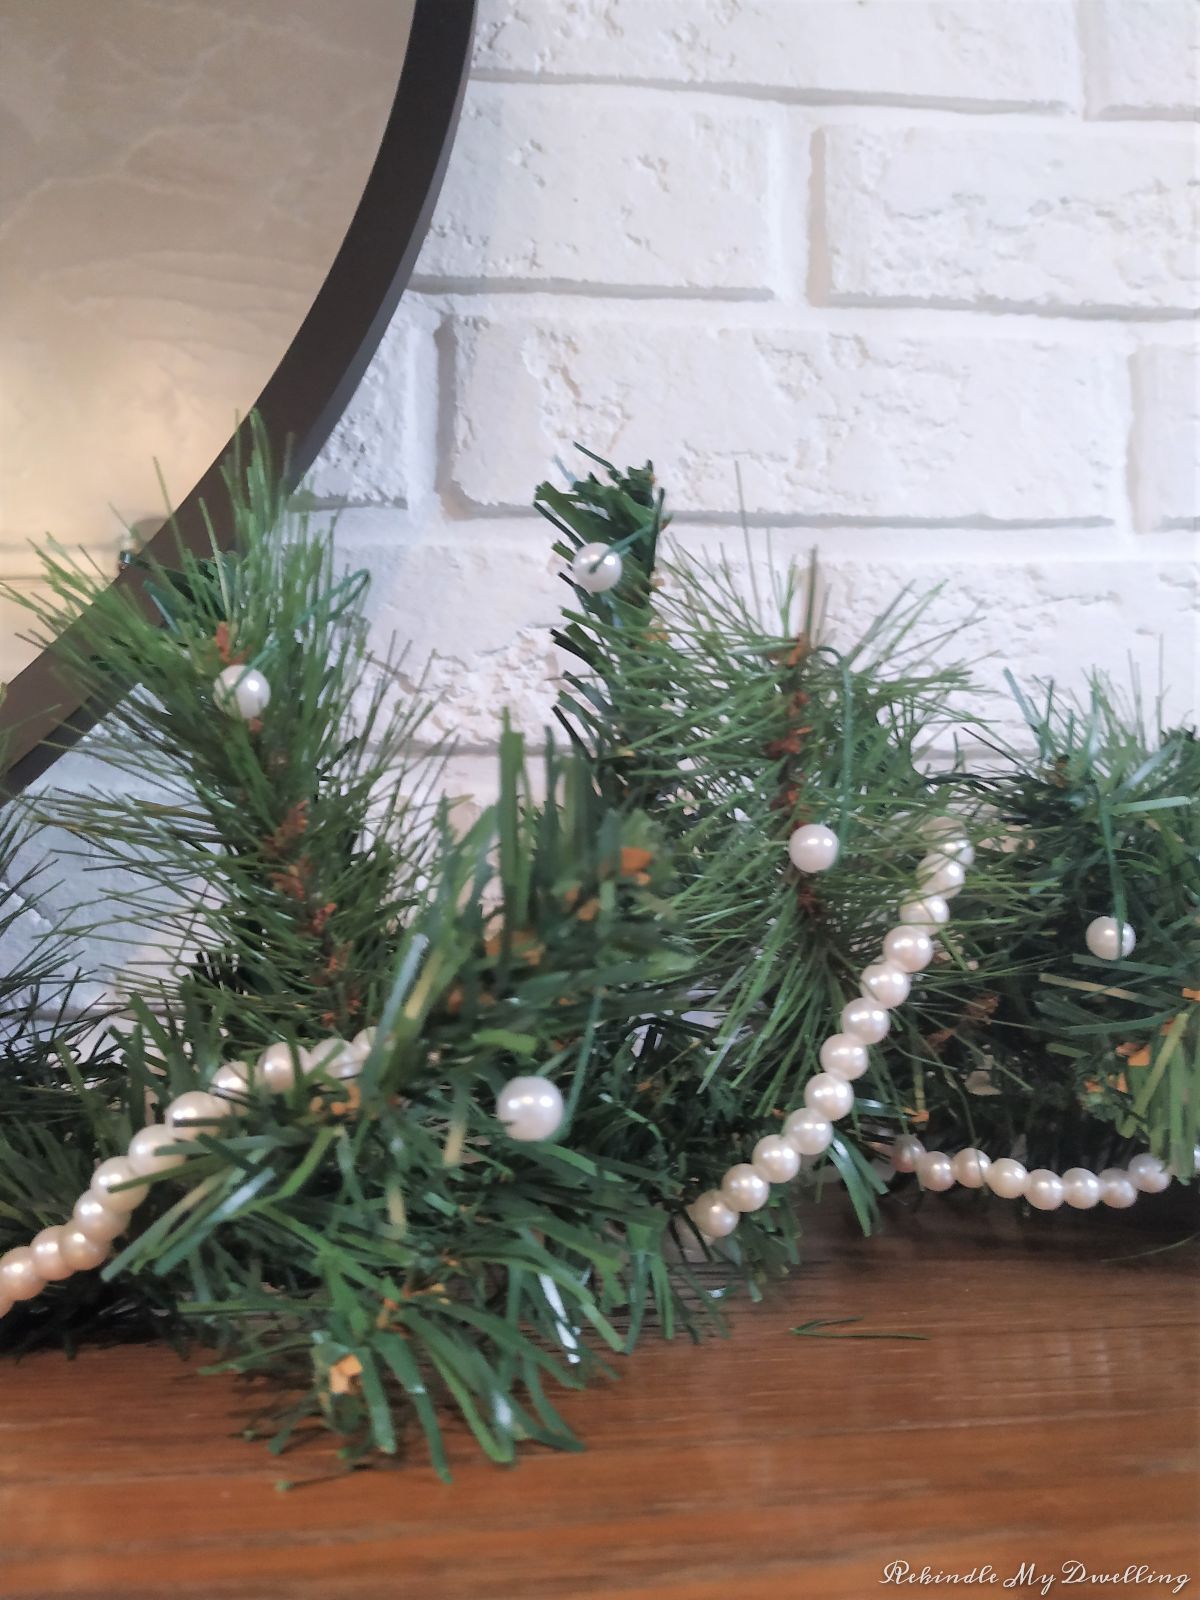 Pearl garland wrapped around greenery.